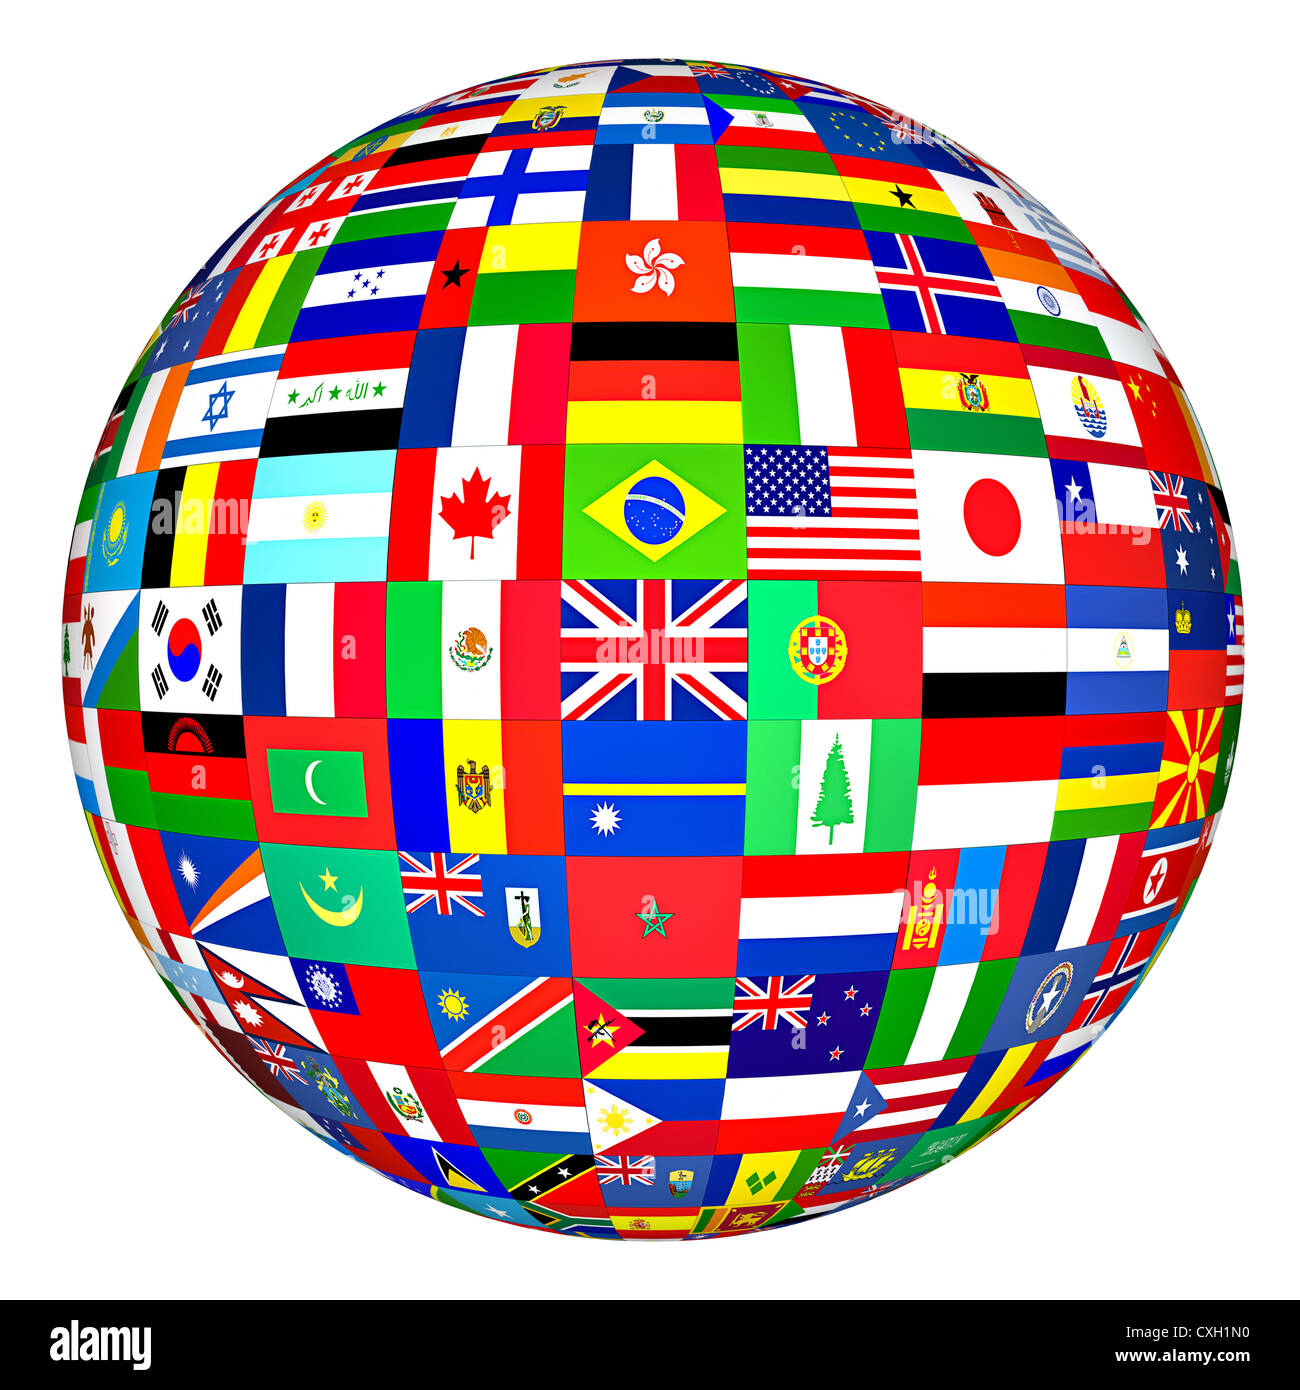 Globe On White Background With Flag Of Various Countries Stock Photo